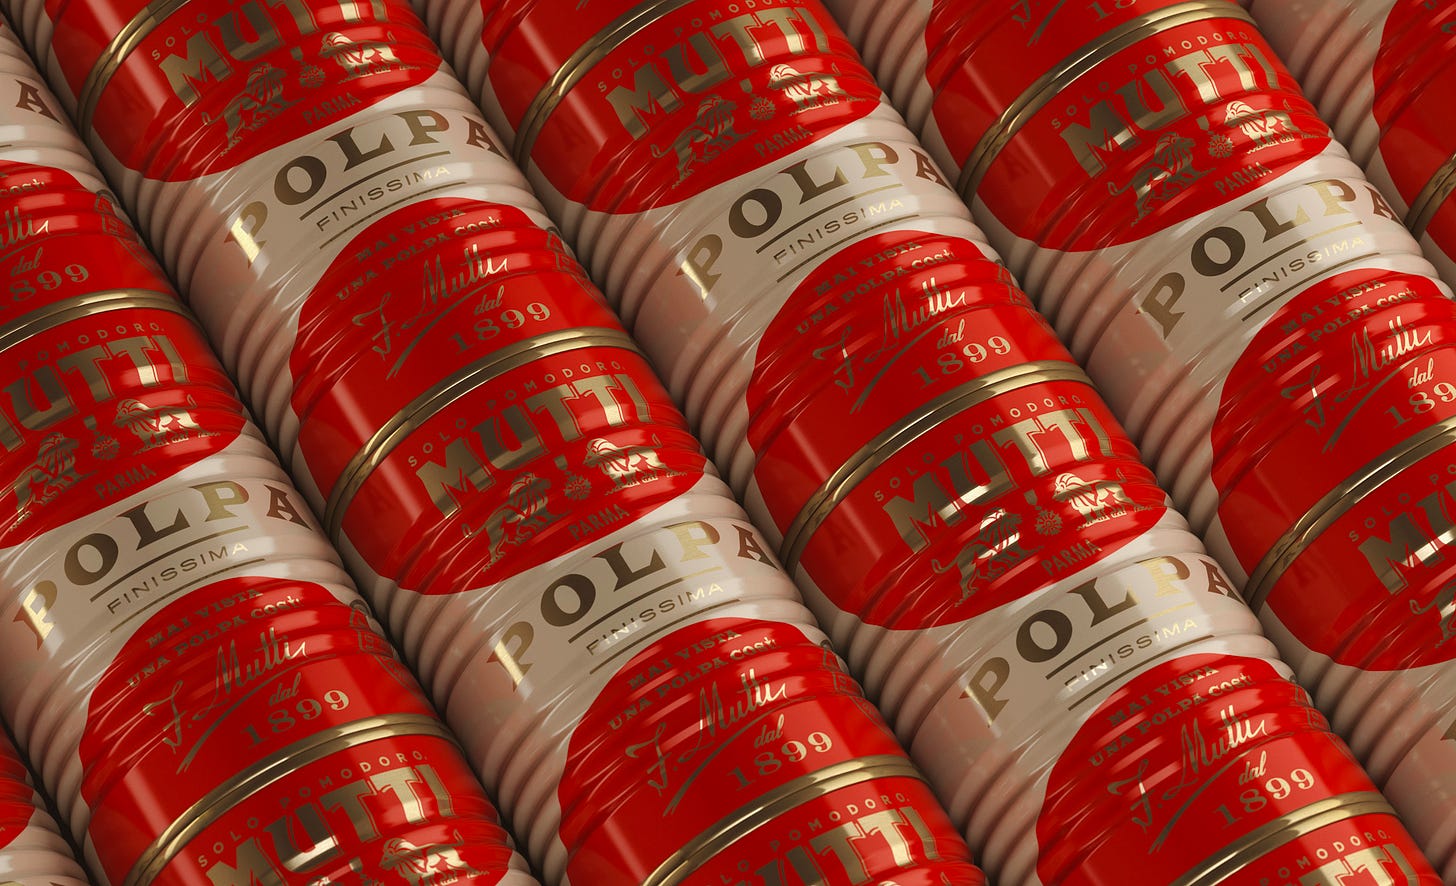 Limited edition Mutti tomato tins, with golden shimmering metallic highlights.